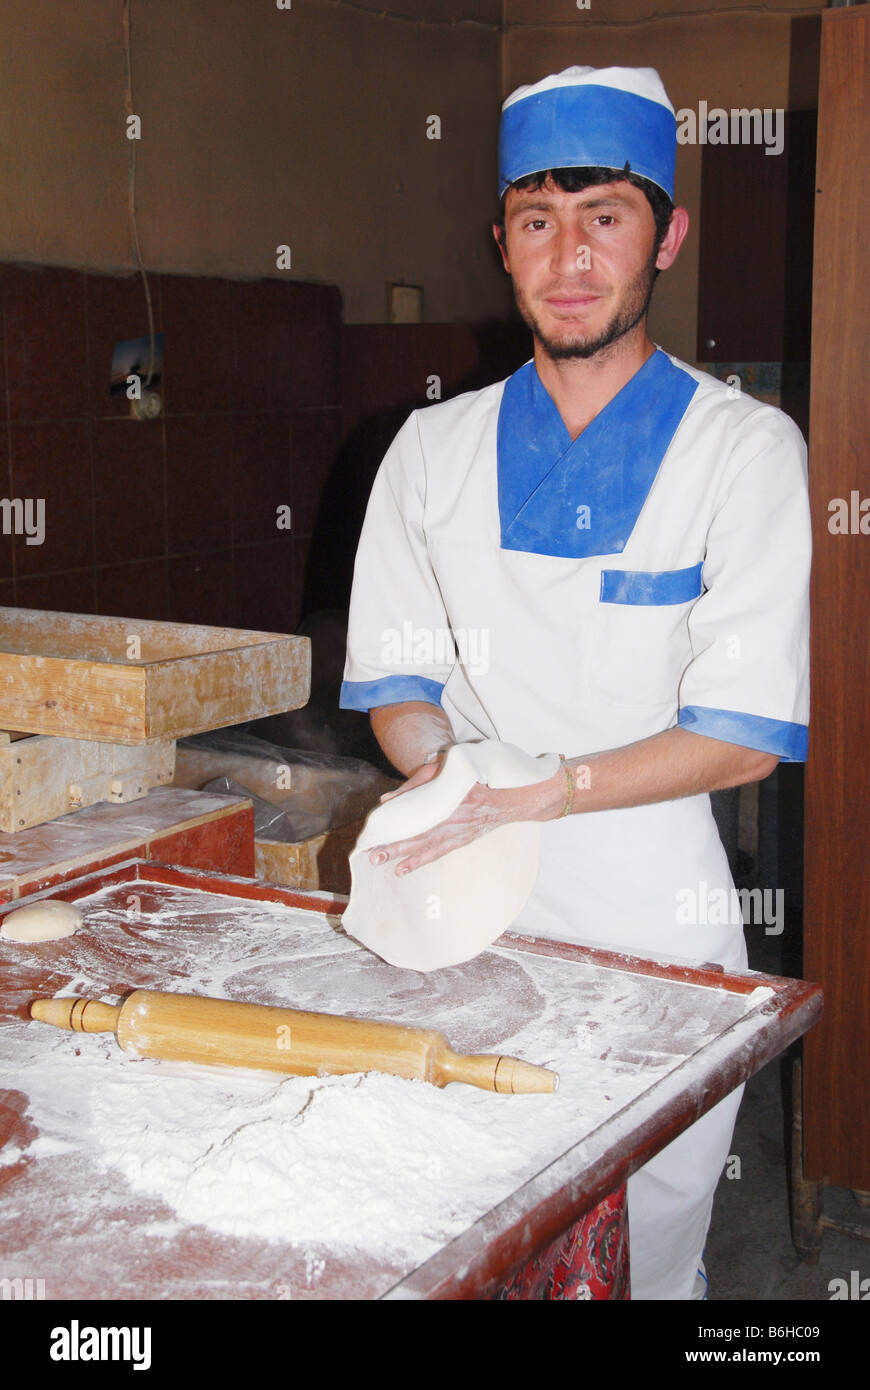 A baker making traditional unleavened bread in a tandoori oven in Turkey Stock Photo